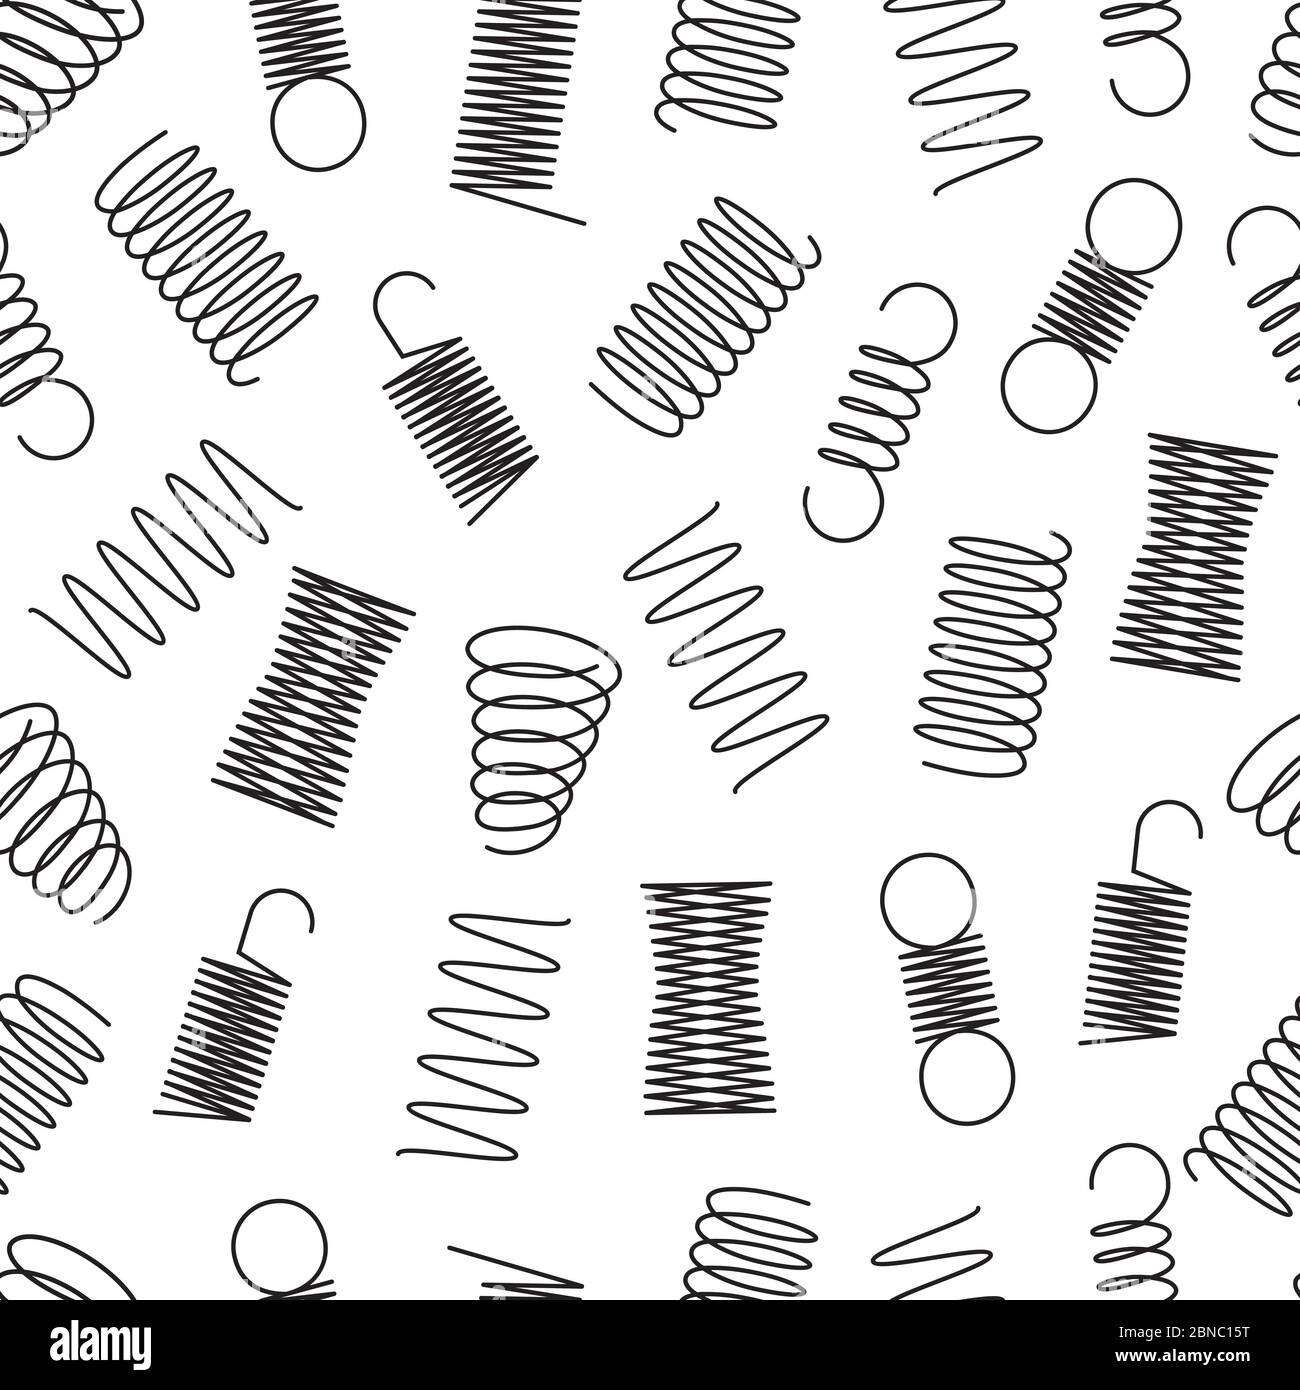 Metal springs seamless pattern. Steel coil spirals, flexible wire elastic lines endless vector texture. Illustration of background flexible coil, spring spiral Stock Vector